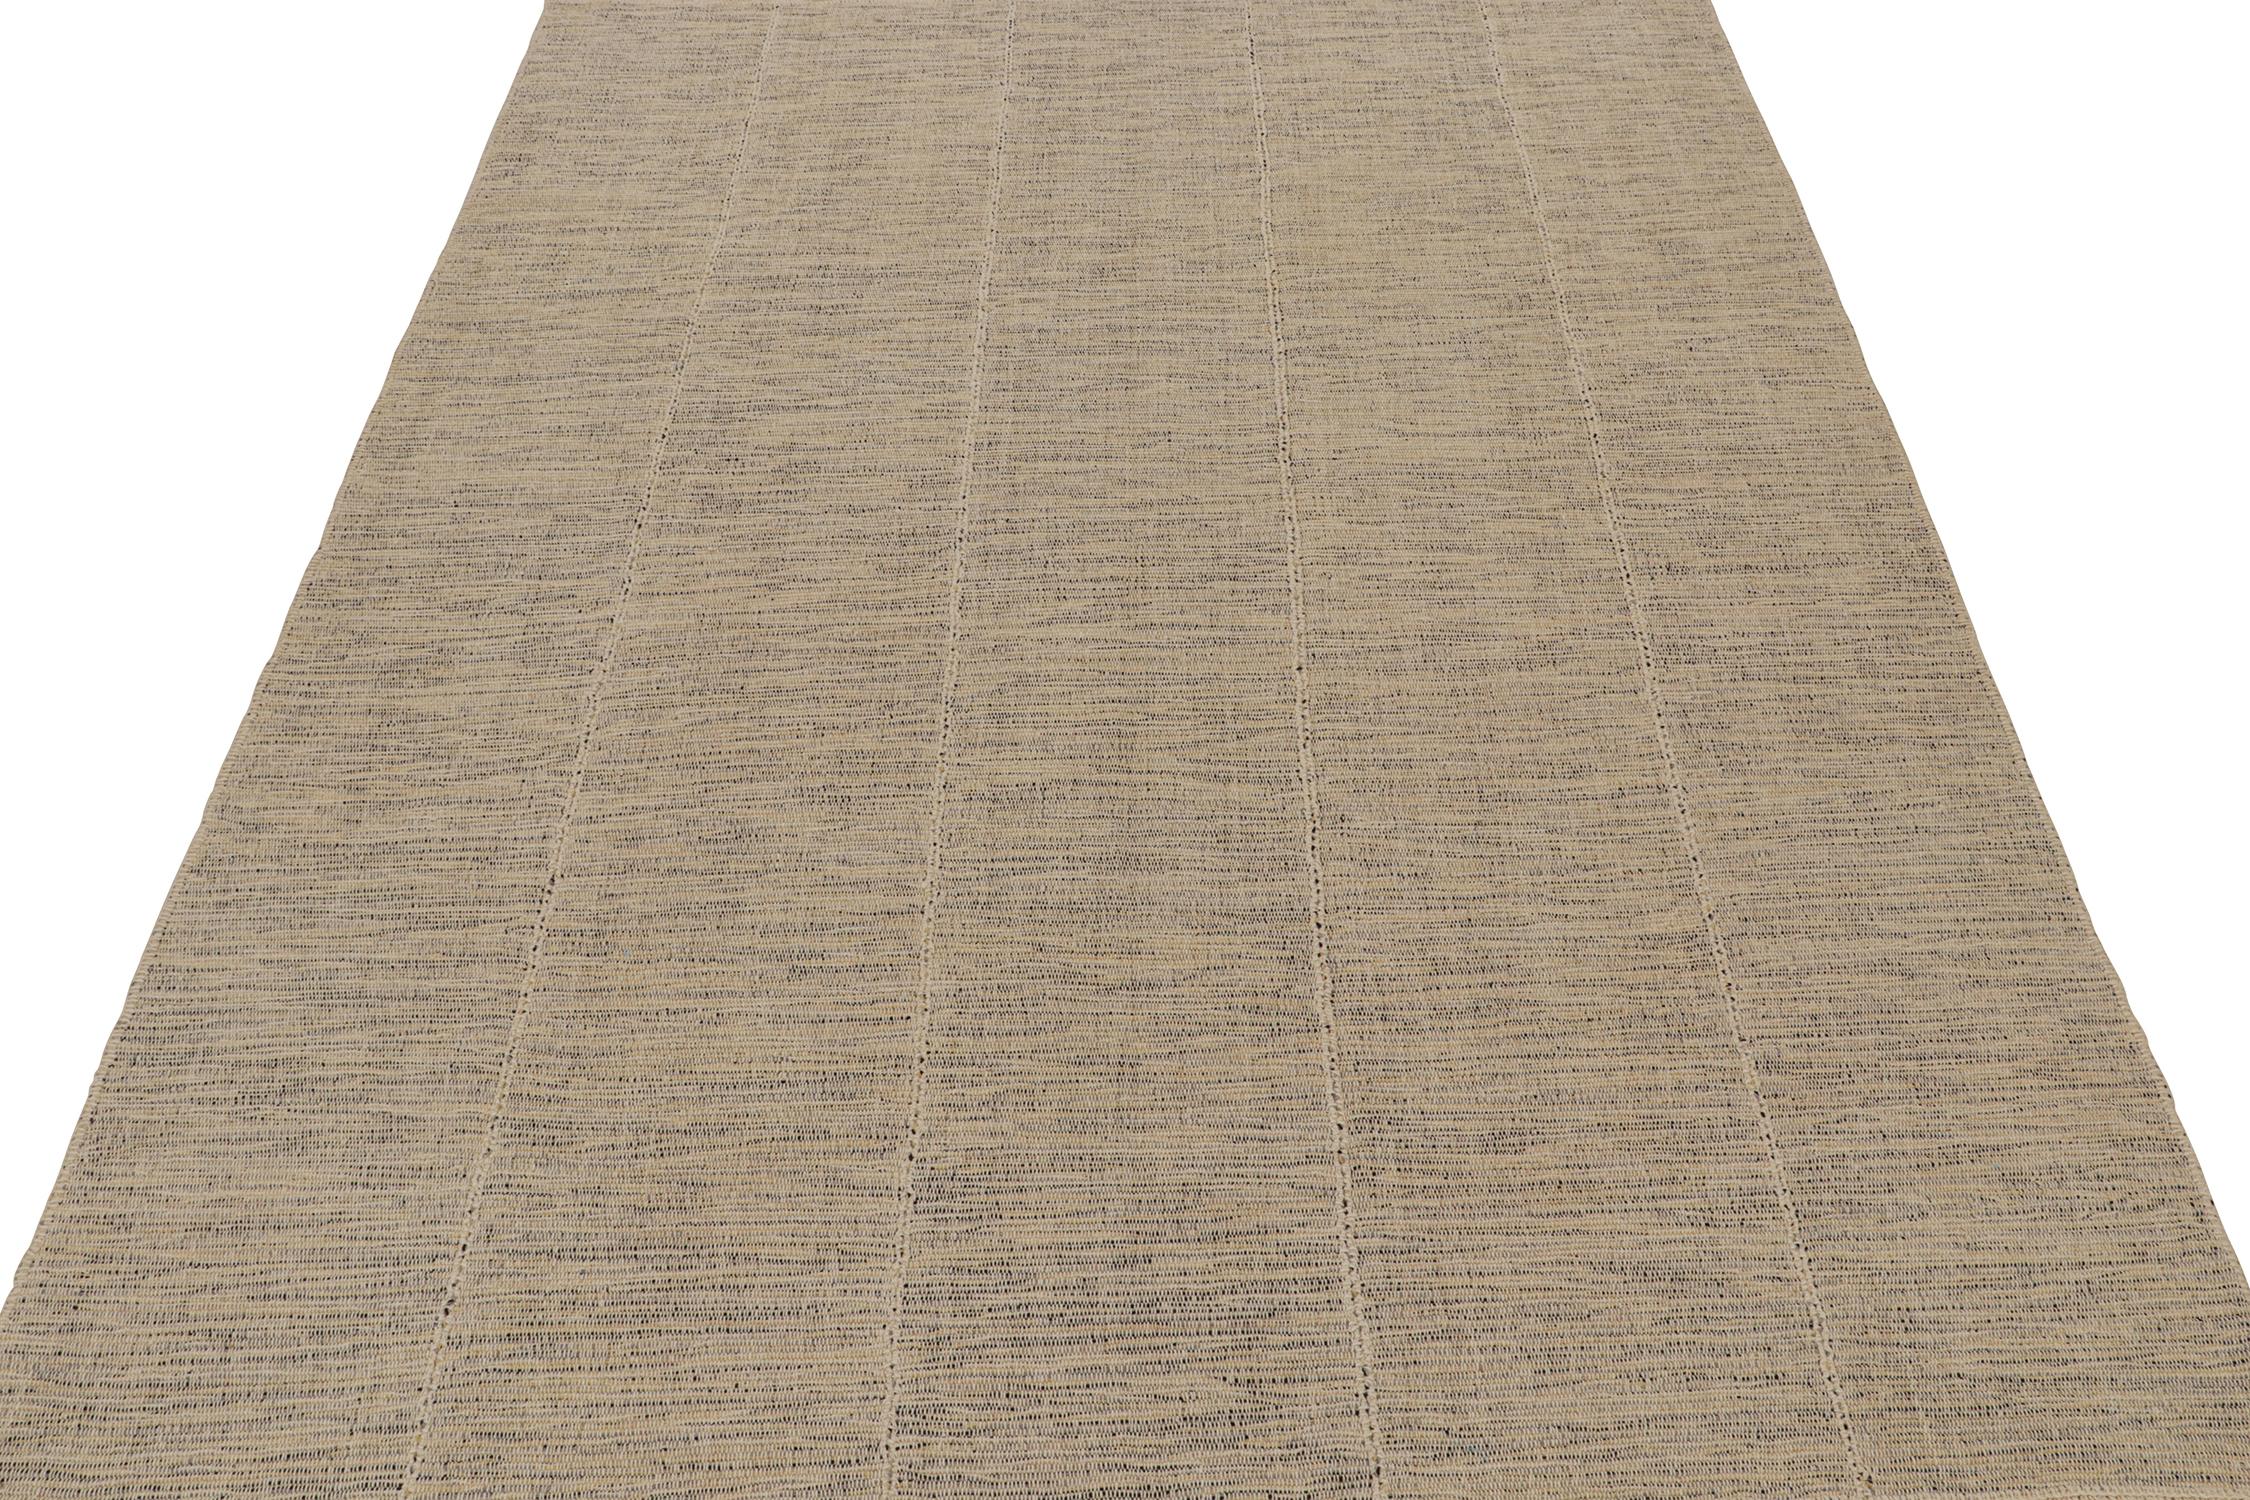 Handwoven in wool, this 9x12 Kilim is from a bold new line of contemporary flatweaves by Rug & Kilim.
Further on the design

The “Rez Kilim” connotes a modern take on classic panel weaving. This edition enjoys comfortable tones of beige with